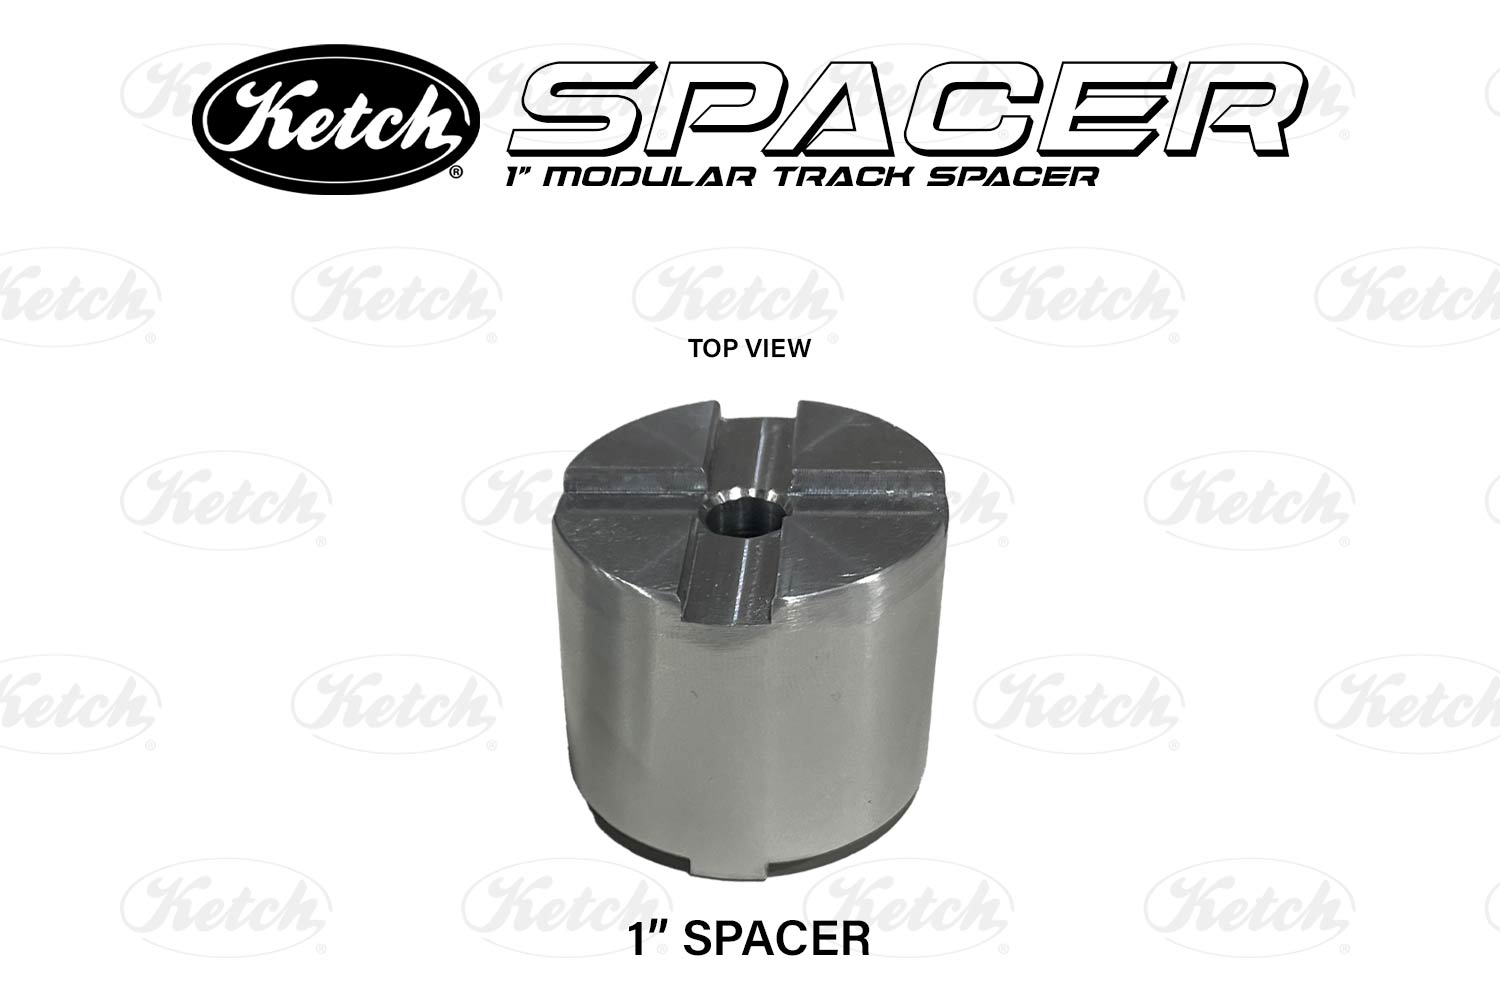 Ketch Products 1 inch modular track spacer to elevate your Ketch Krossbar for mounting on kayaks.